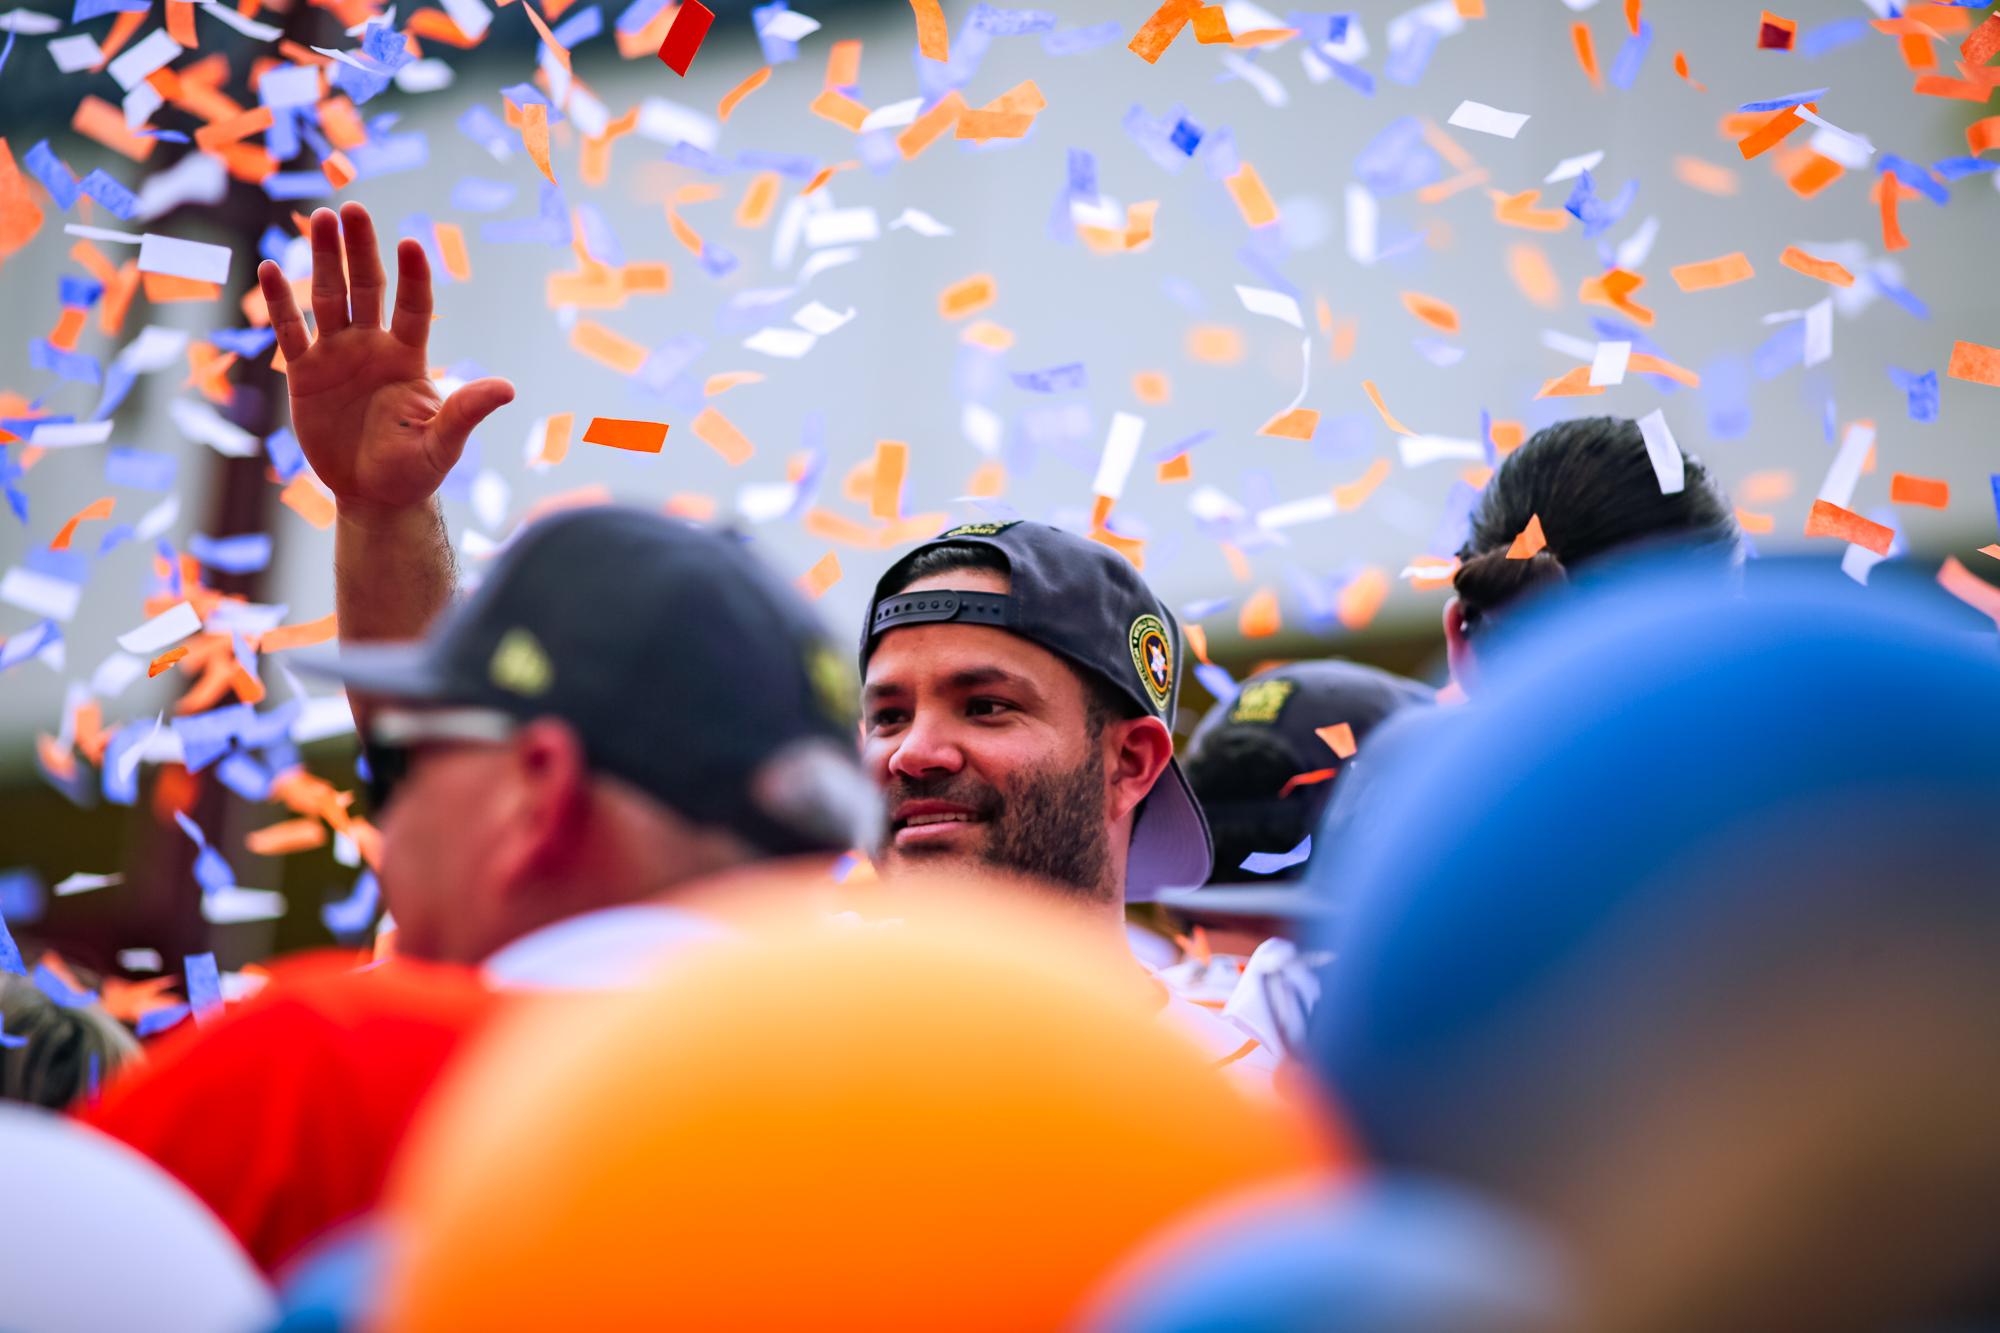 PHOTOS: Celebrity sightings on the Astros World Series parade route